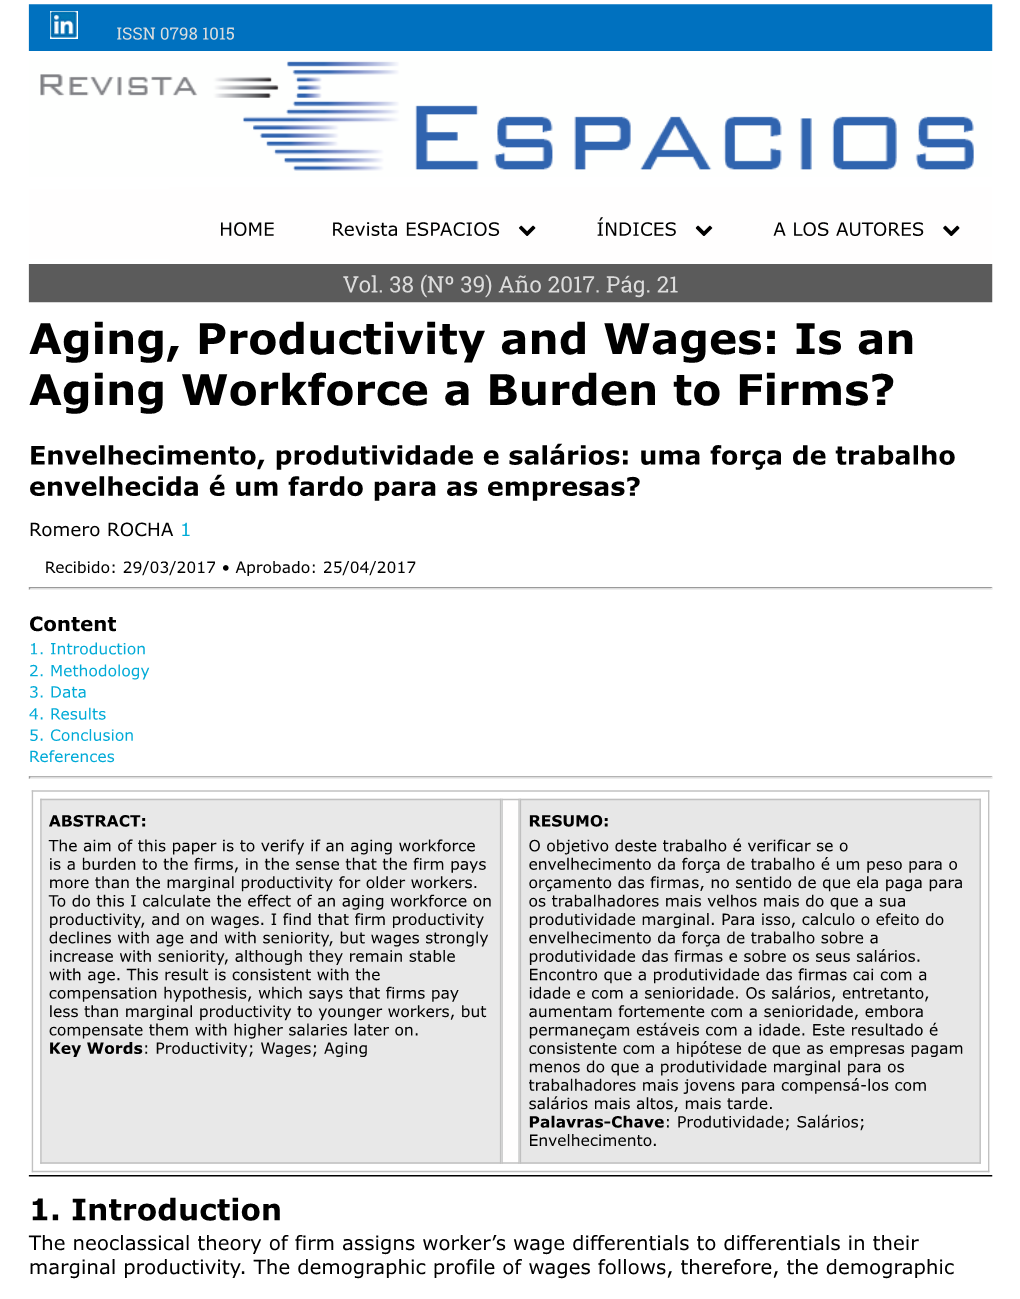 Aging, Productivity and Wages: Is an Aging Workforce a Burden to Firms?